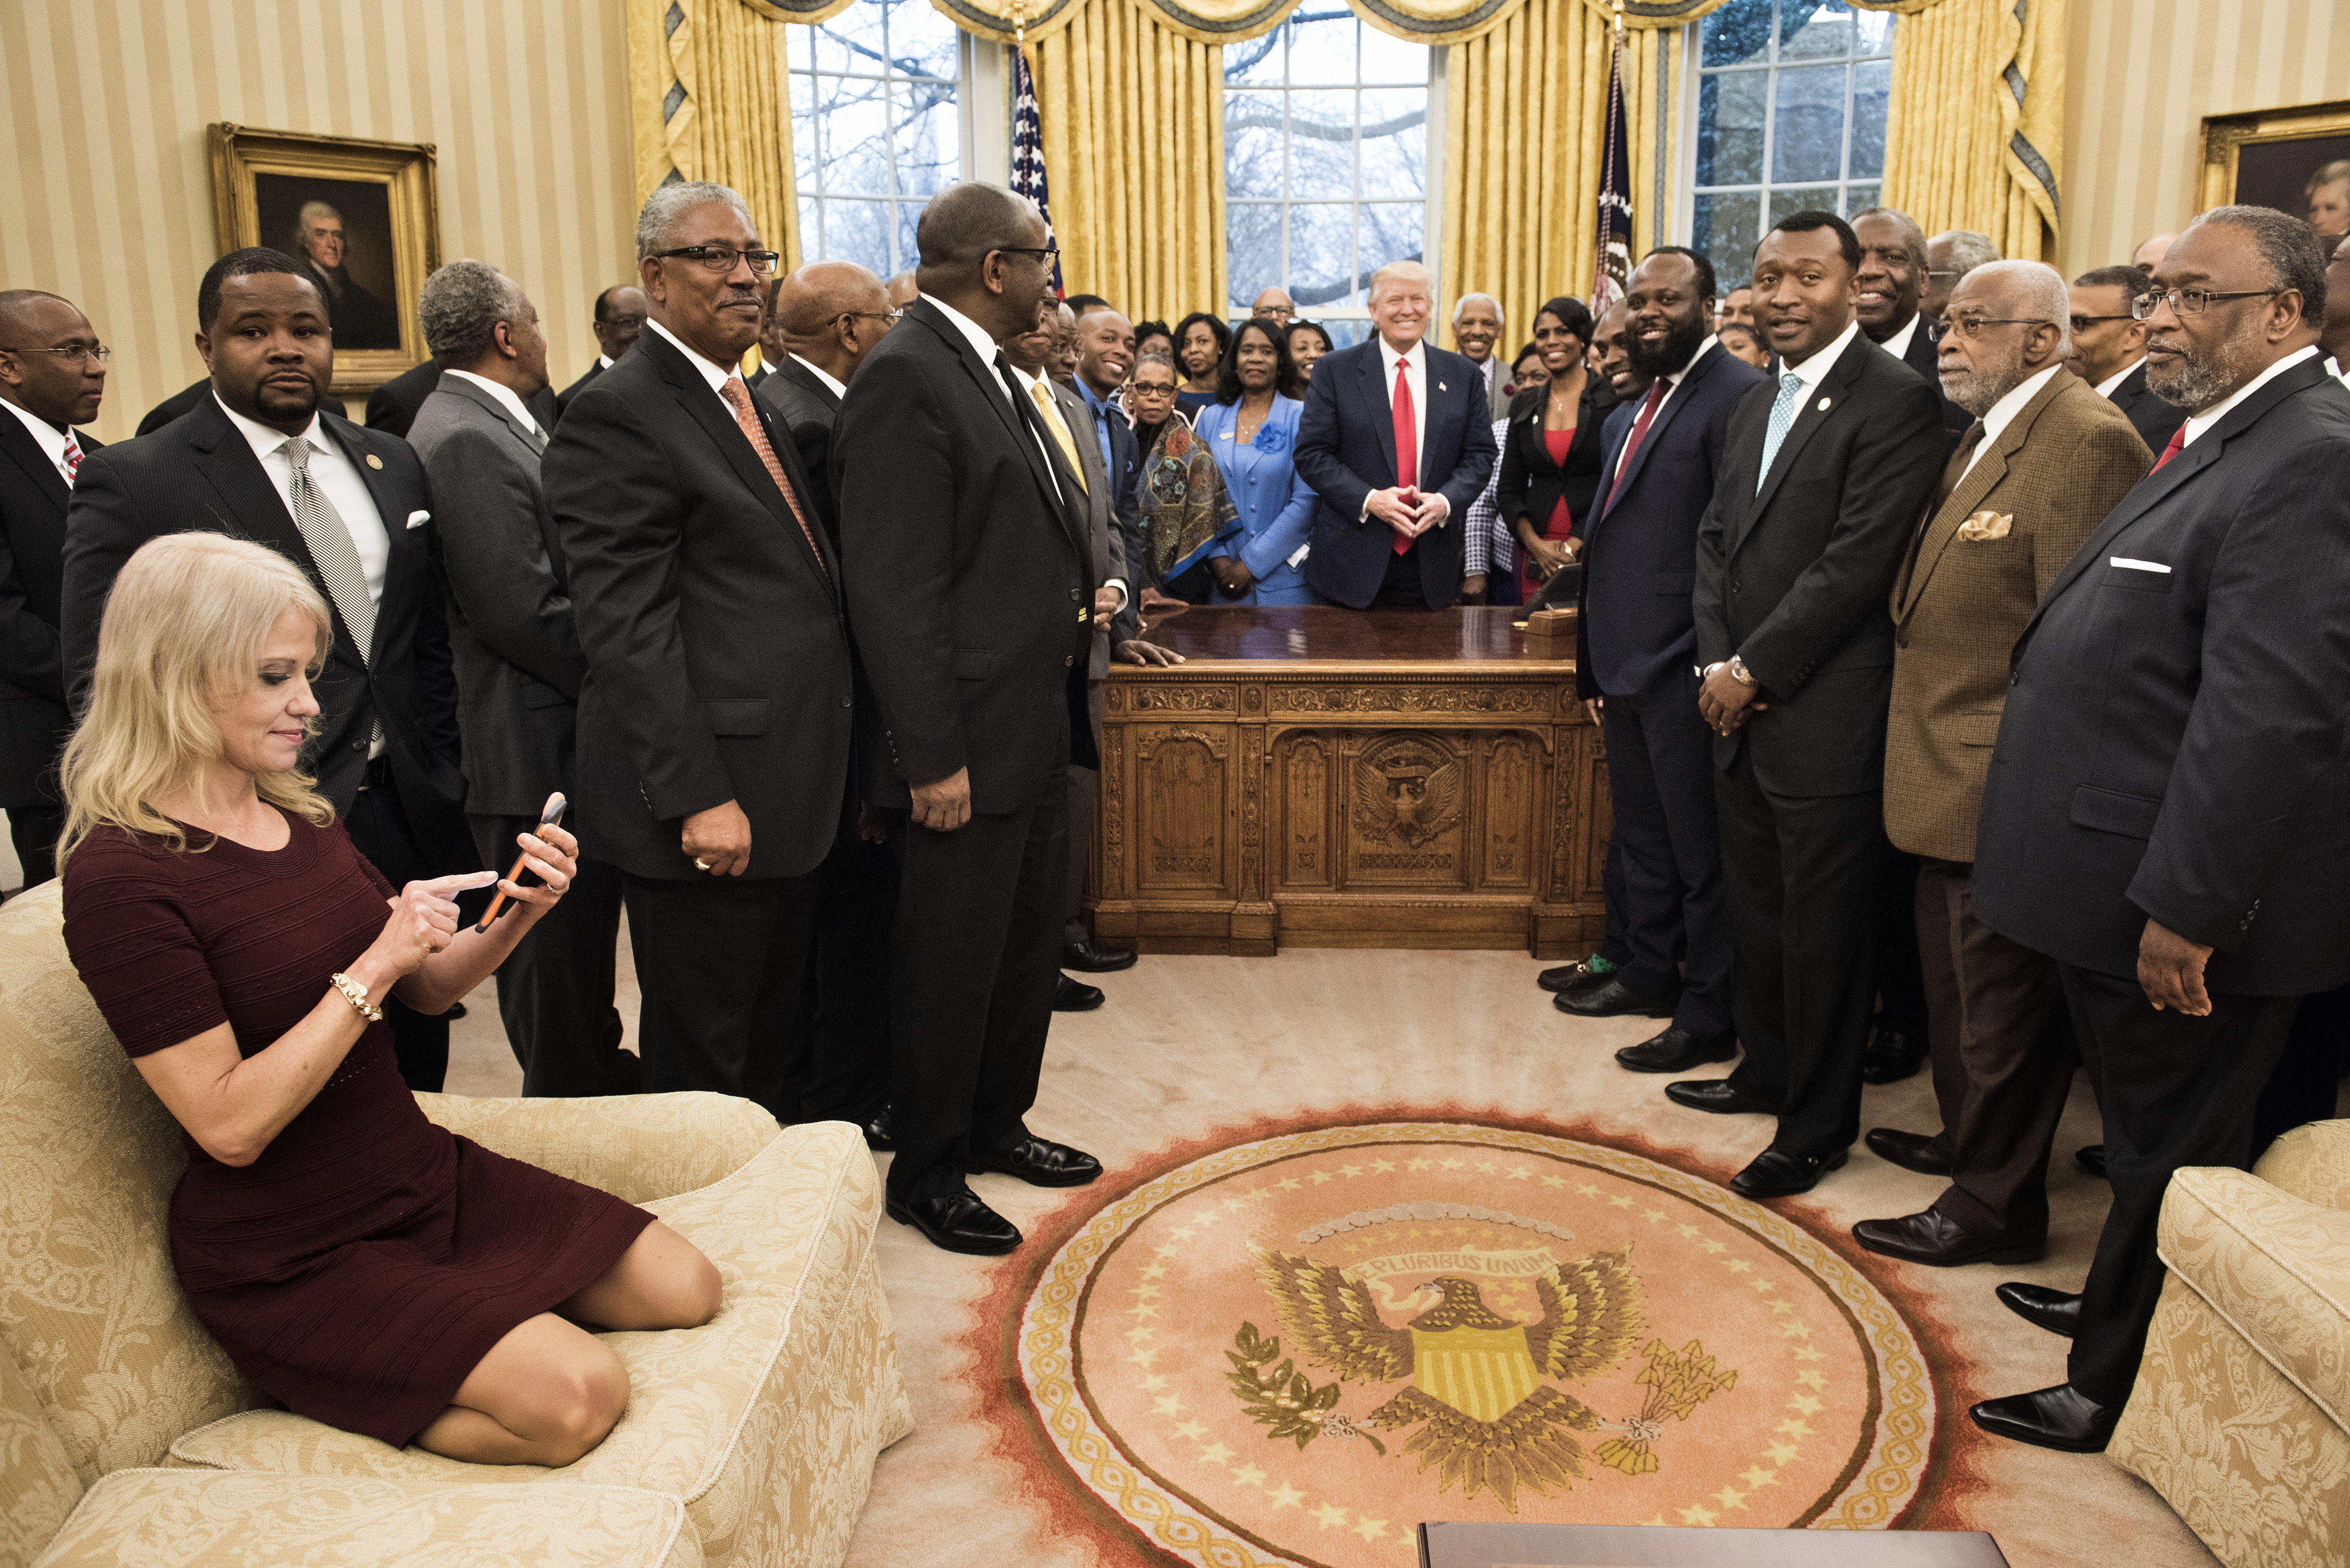 Counselor to the President Kellyanne Conway (L) checks her phone after taking a photo as US President Donald Trump and leaders of historically black universities and colleges pose for a group photo in the Oval Office of the White House before a meeting with US Vice President Mike Pence February 27, 2017 in Washington, DC. / AFP PHOTO / Brendan Smialowski